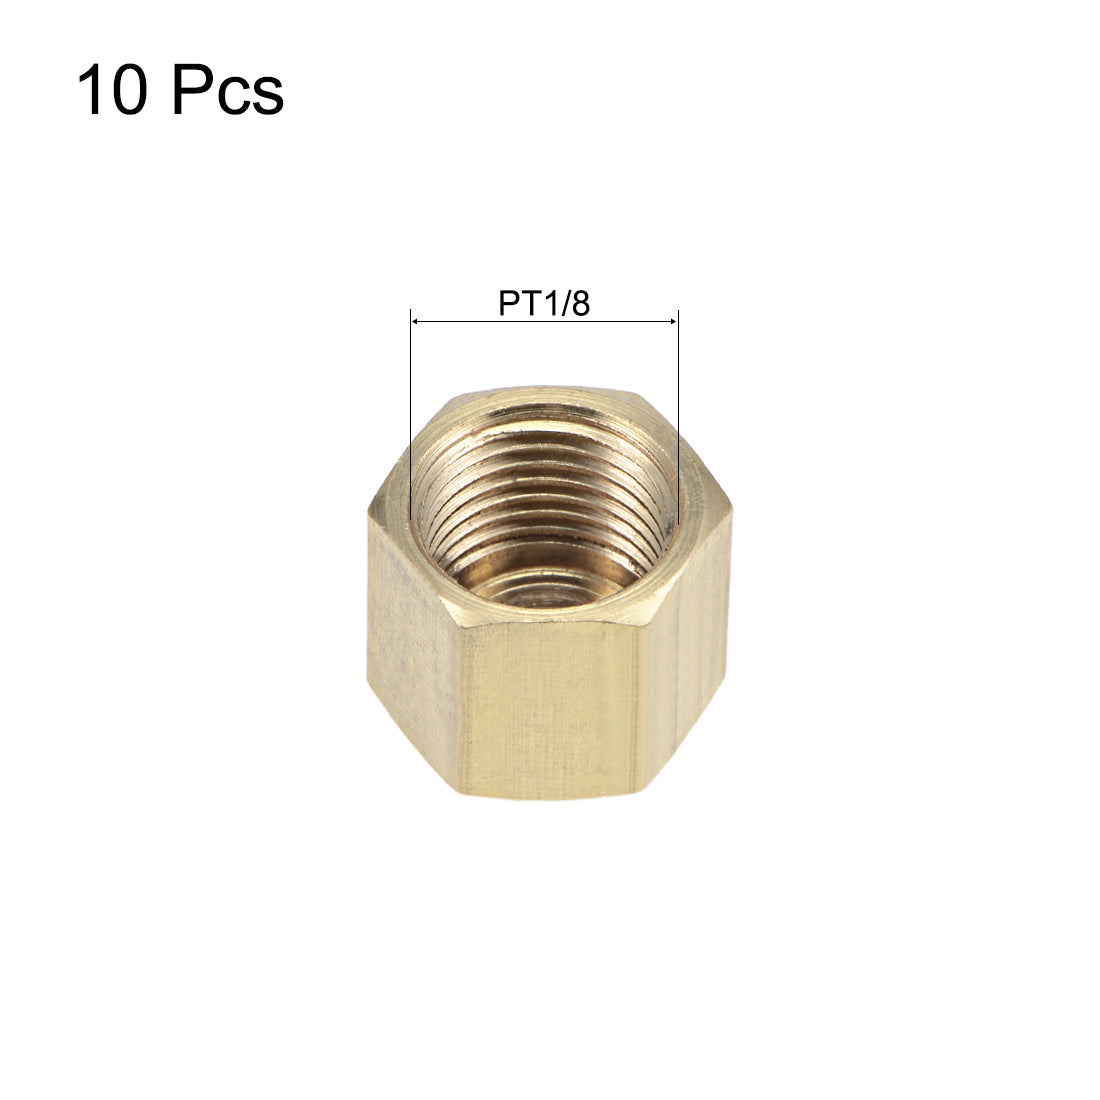 uxcell Uxcell 1/8 Inch Brass Cap 10pcs PT1/8 Female Pipe Fitting Hex Compression Stop Valve Connector 11x11mm